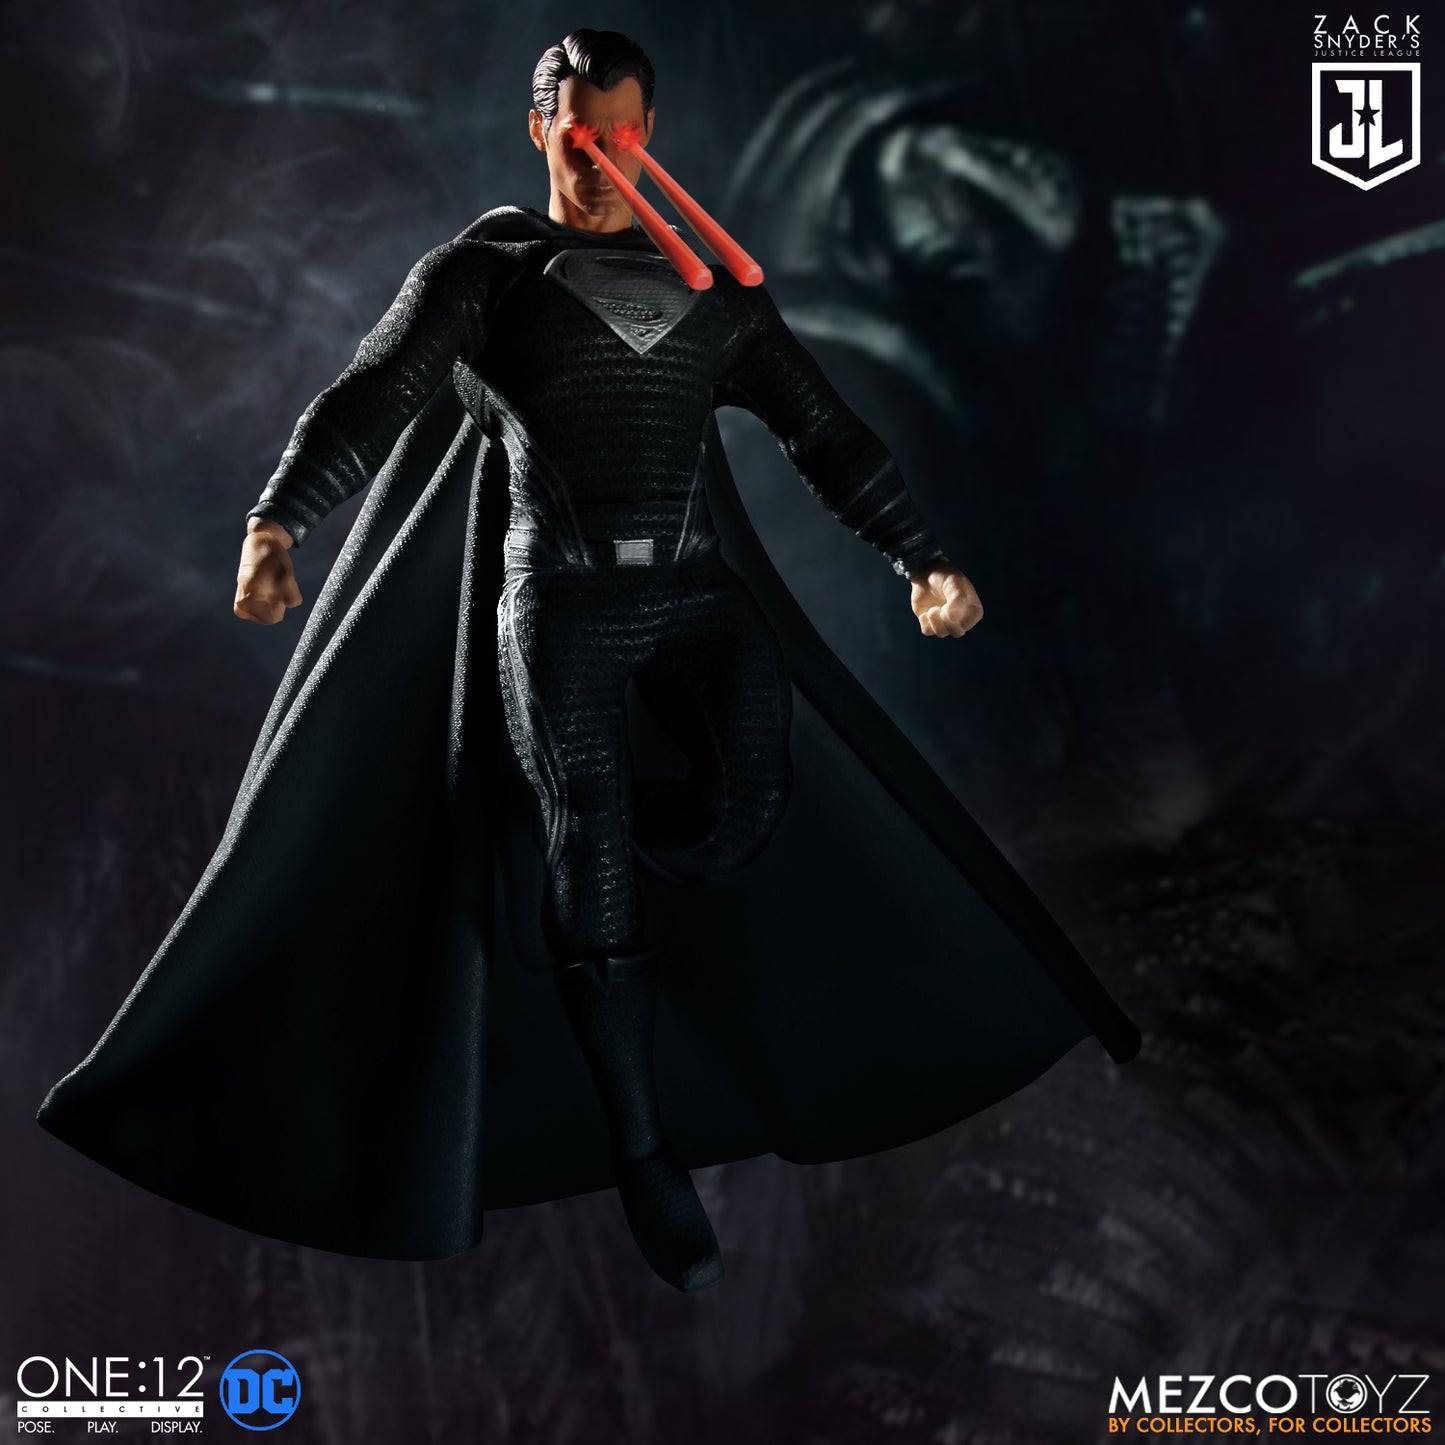 Mezco One Twelfth Collective Zack Snyder’s Justice League Deluxe Steel Boxed Set Black Suit Superman figure with heat vision effects